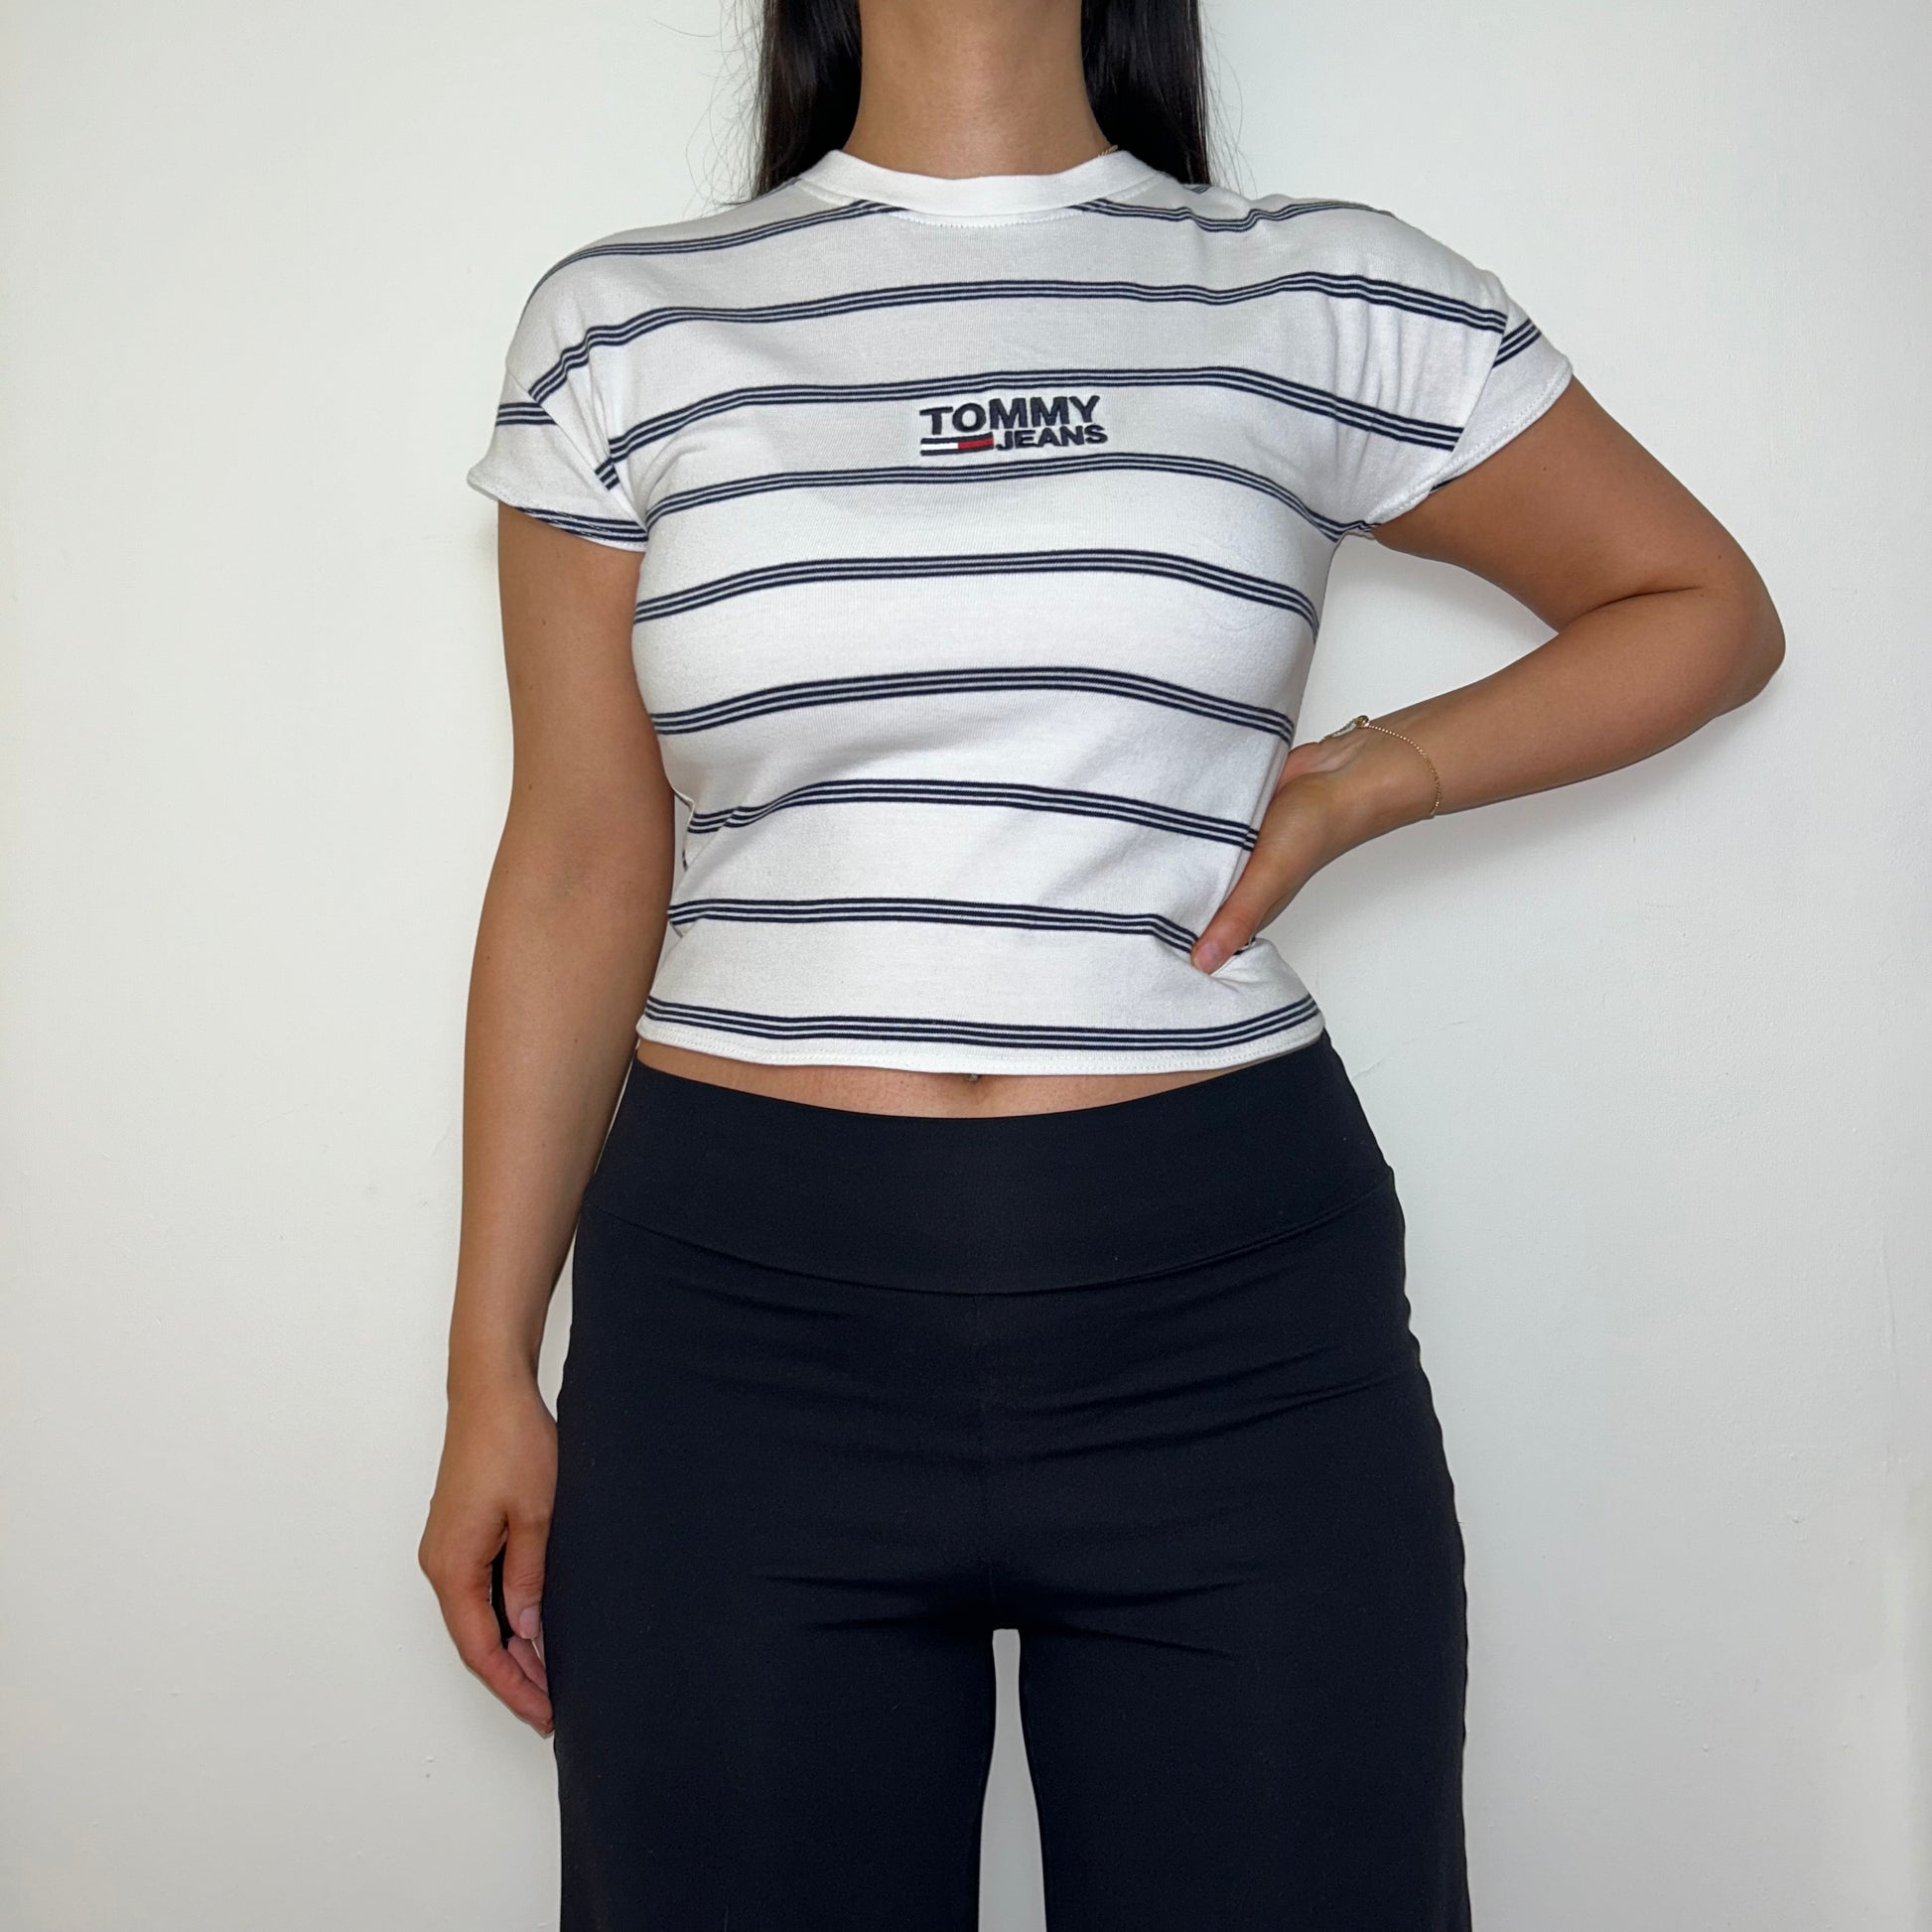 white stripe short sleeve crop top with black tommy jeans logo shown on a model wearing black trousers